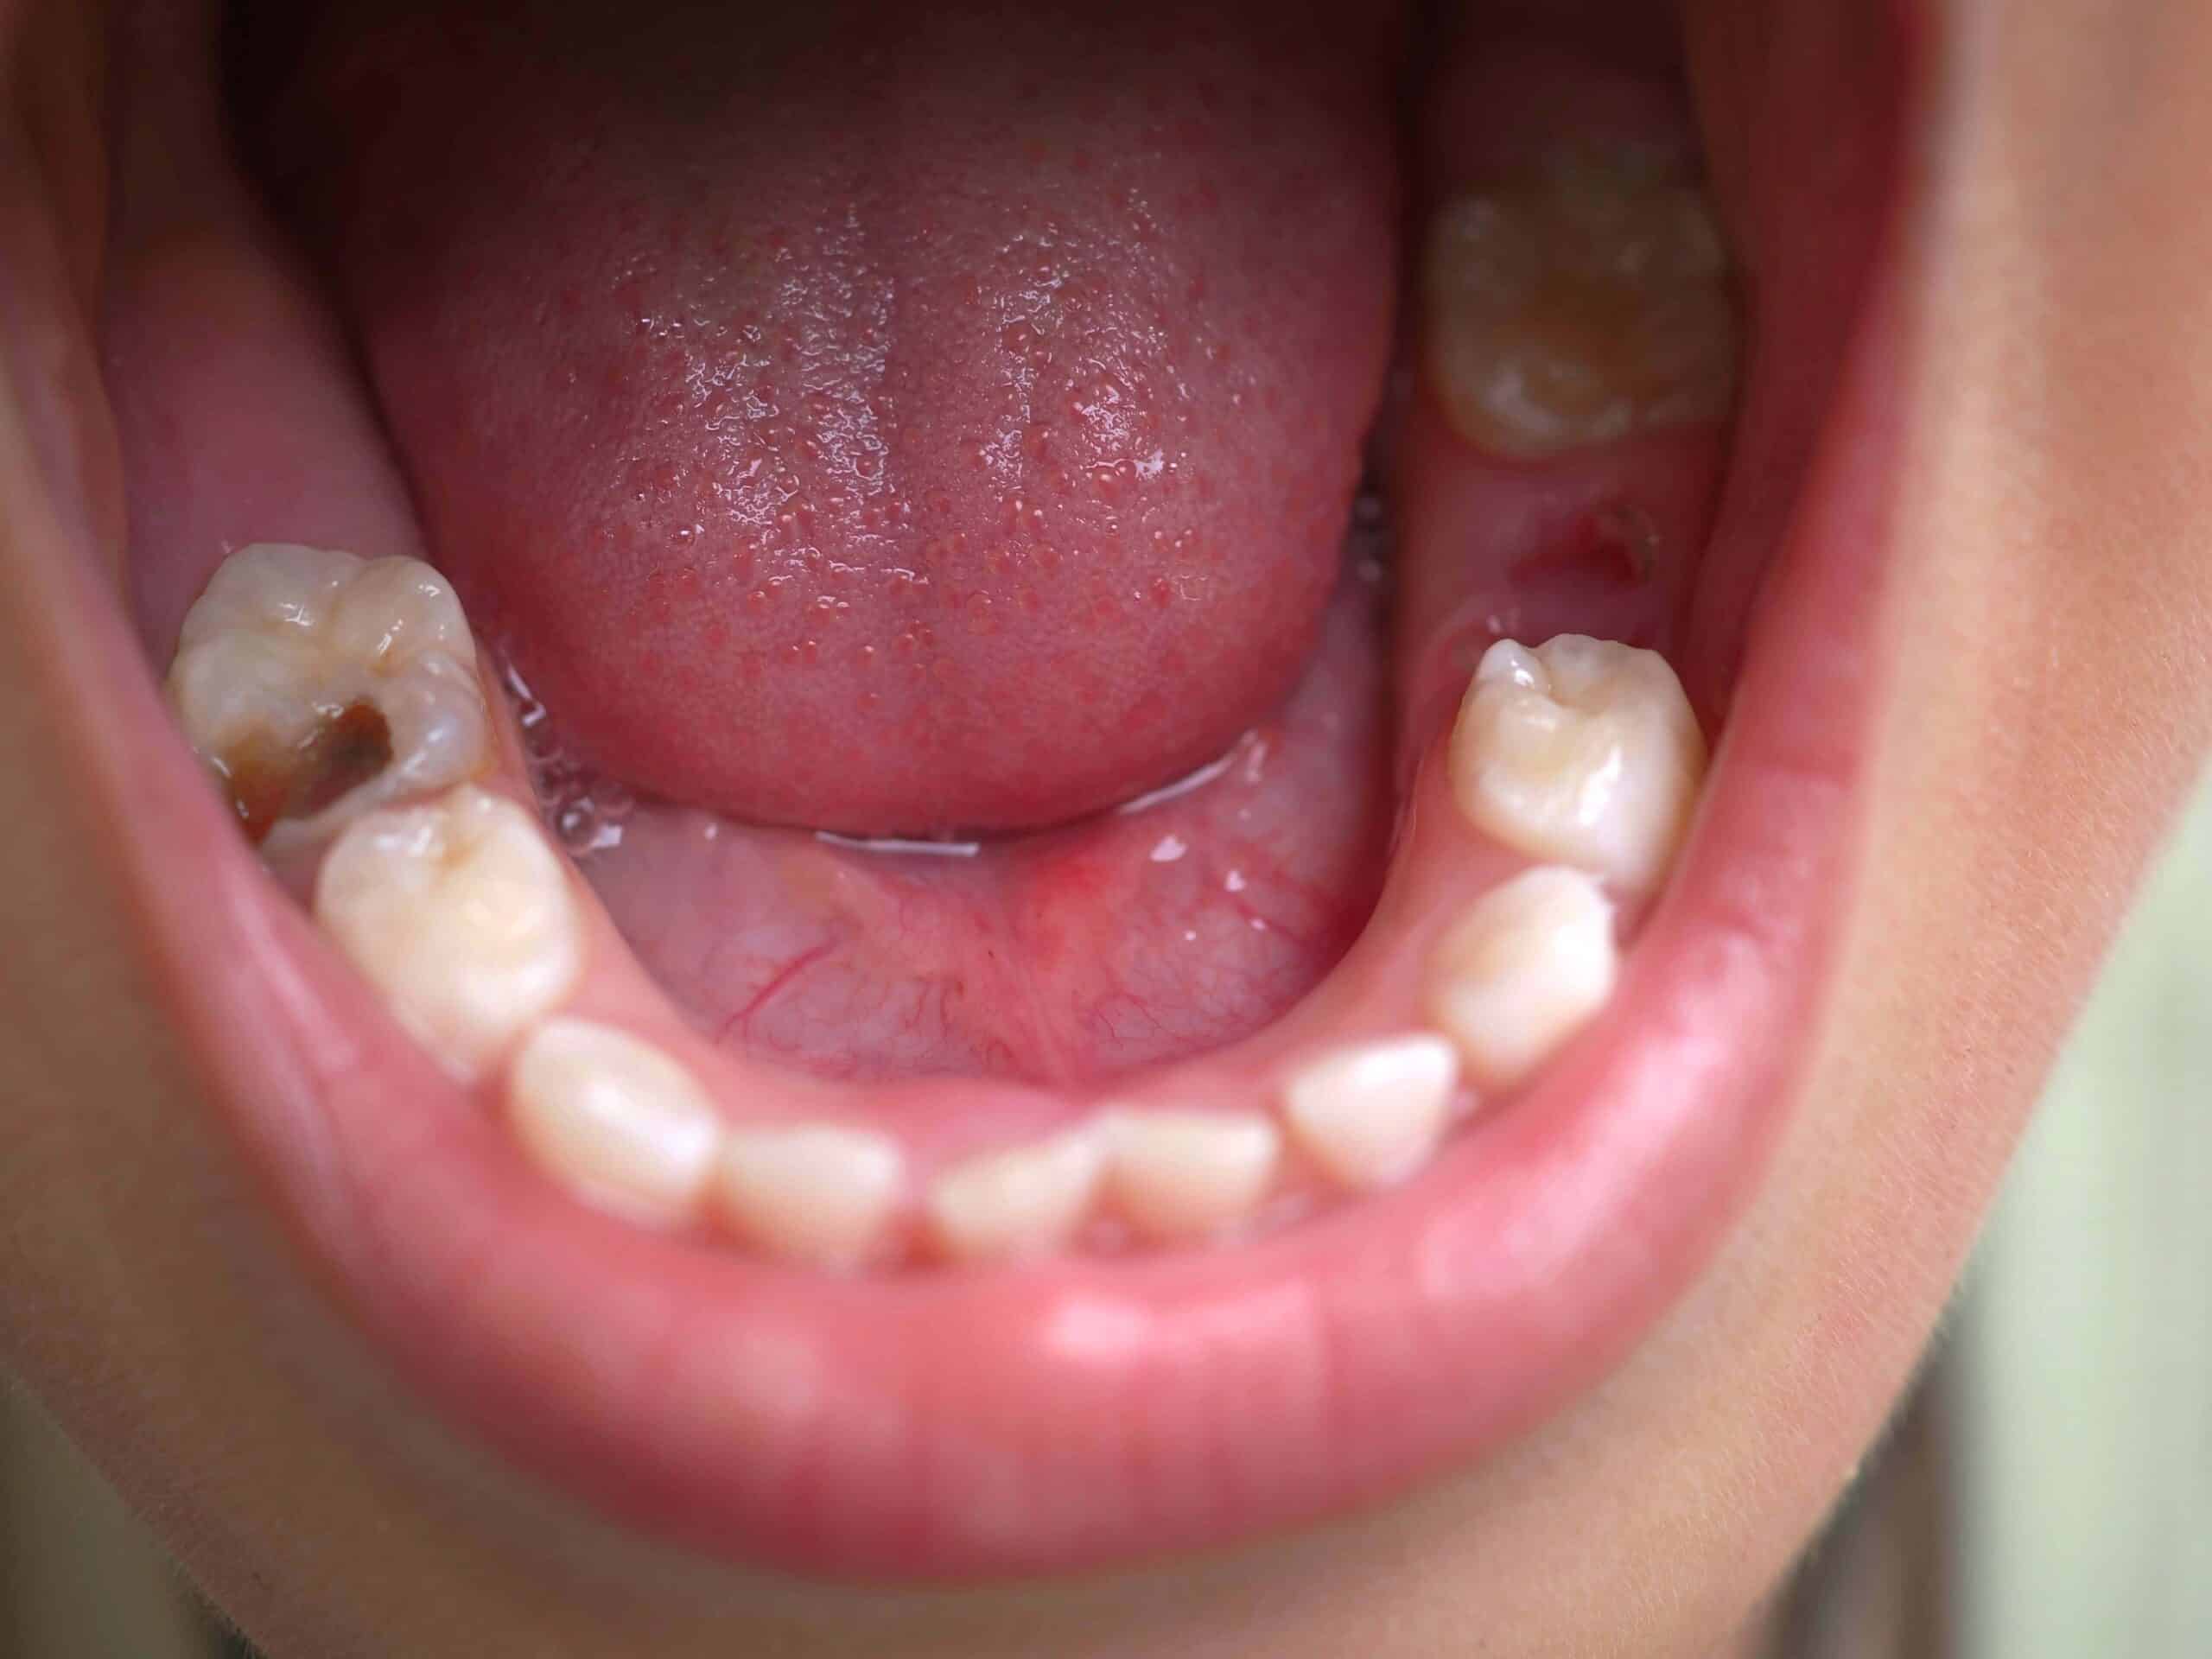 Child patient open mouth showing caries teeth decay